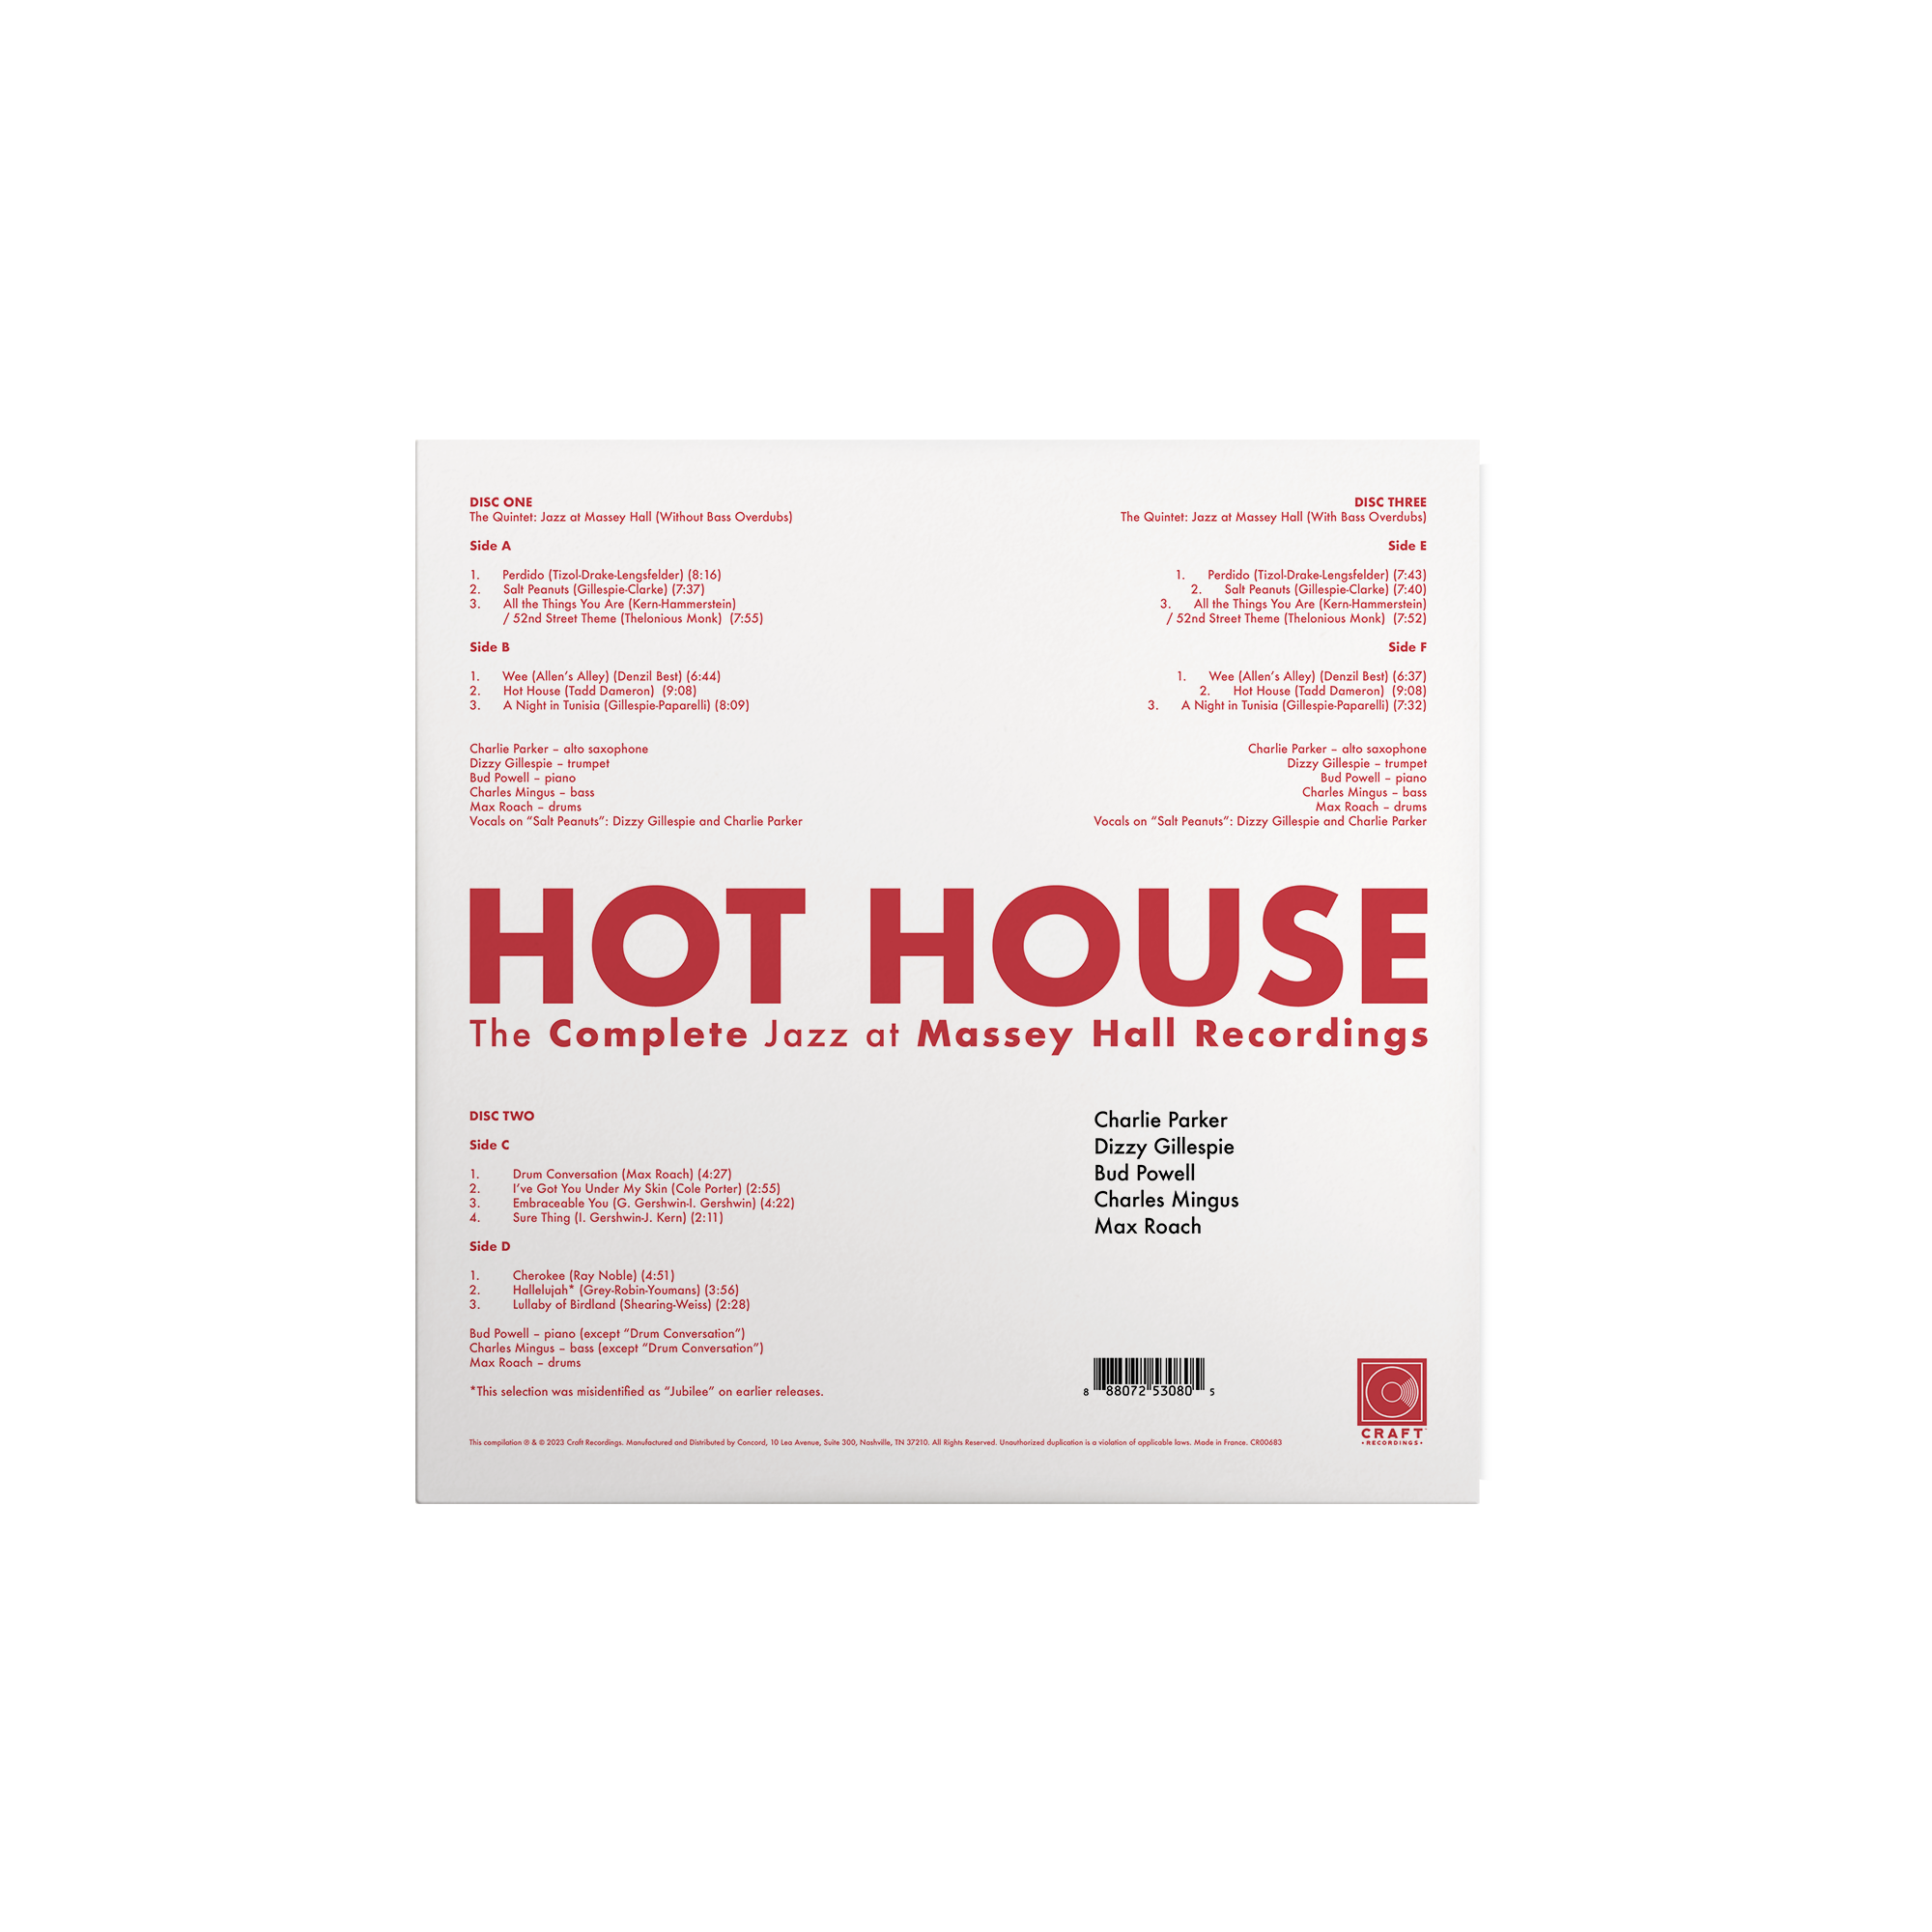 Hot House: The Complete Jazz at Massey Hall Recordings (3-LP Box Set)